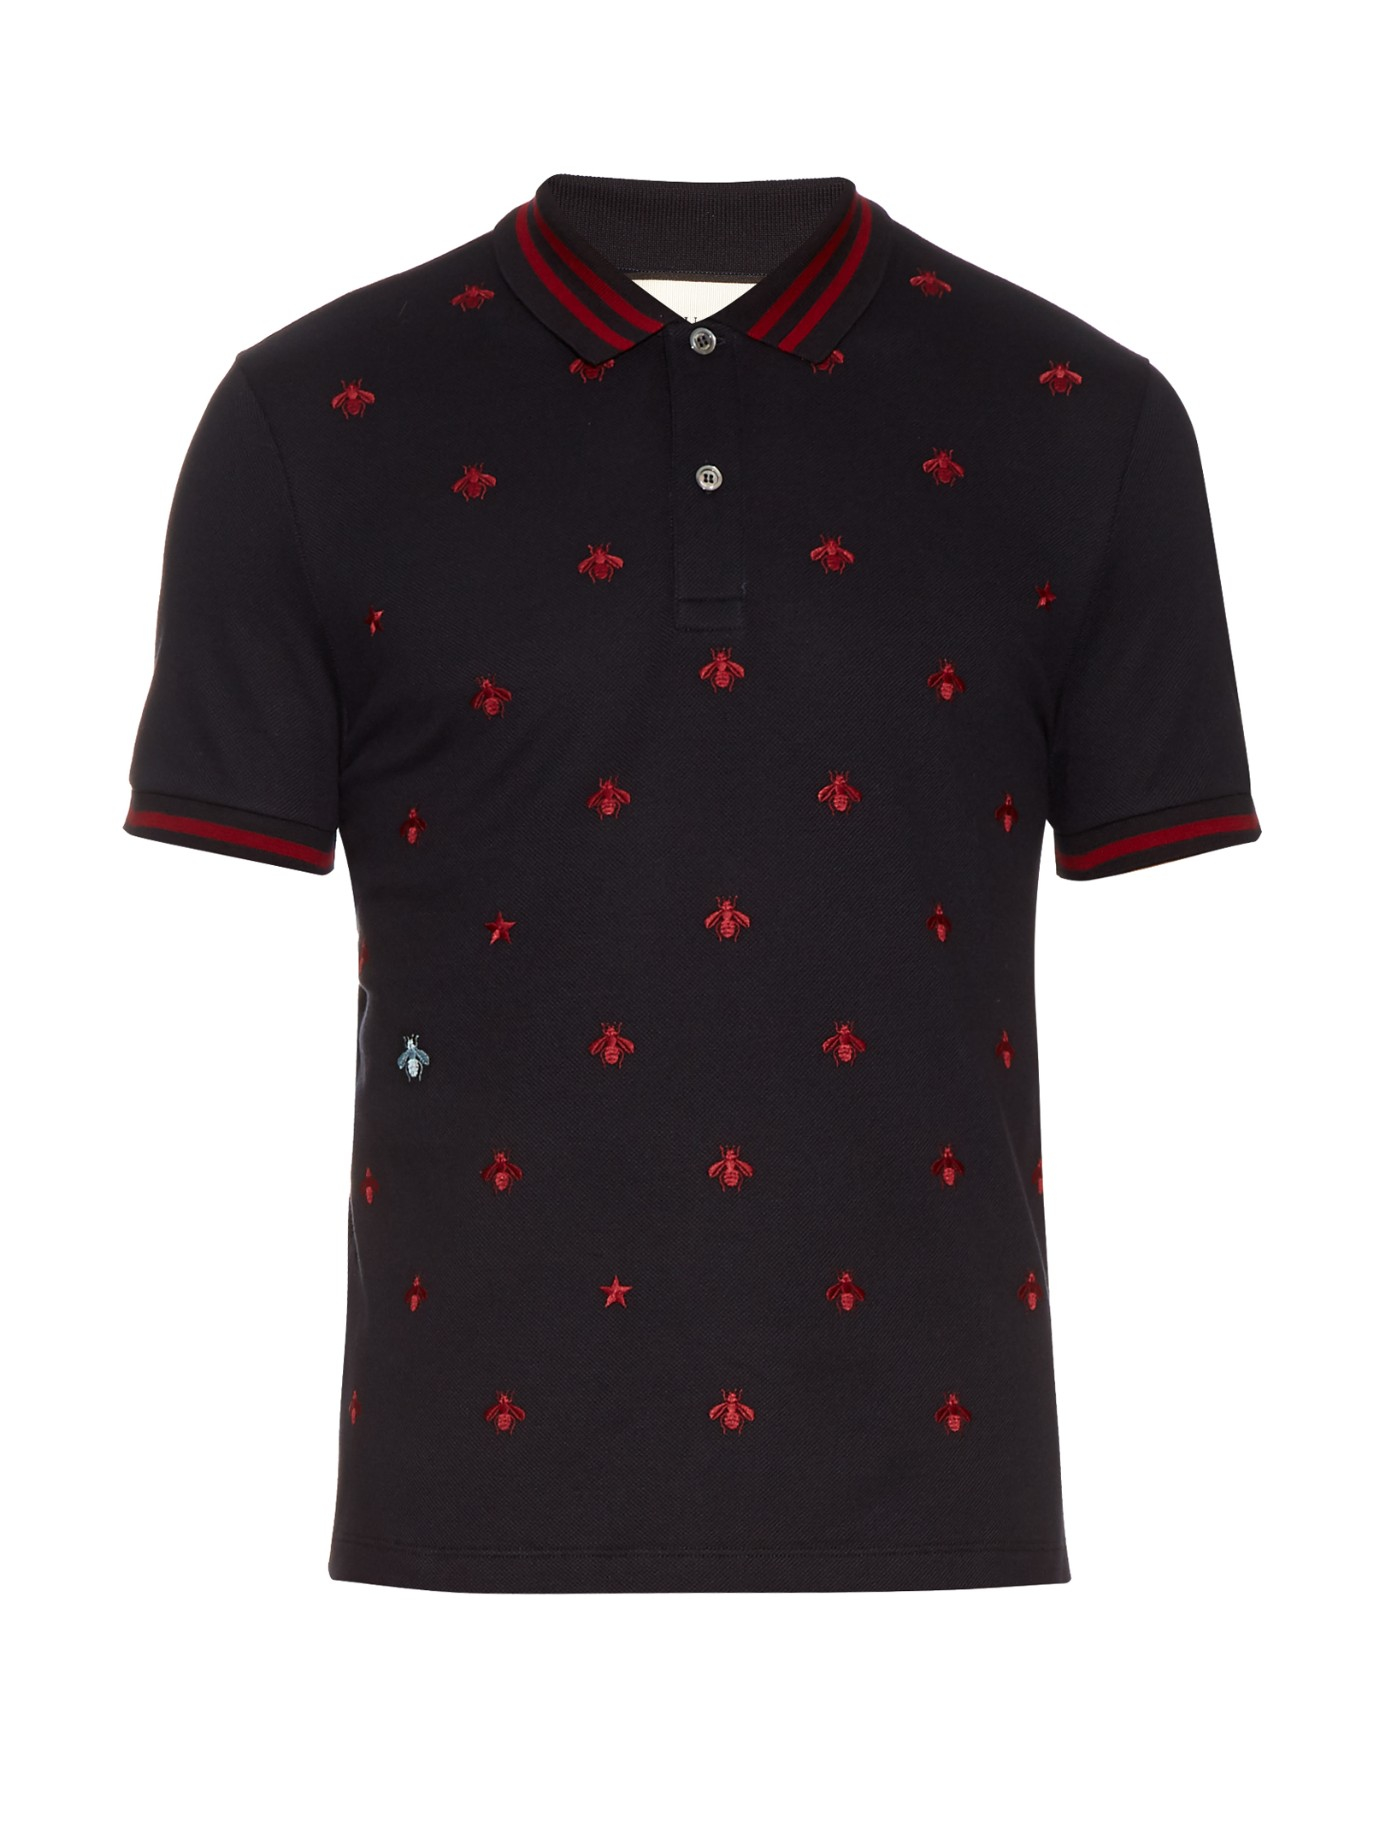 black and red gucci shirt, OFF 73%,www 